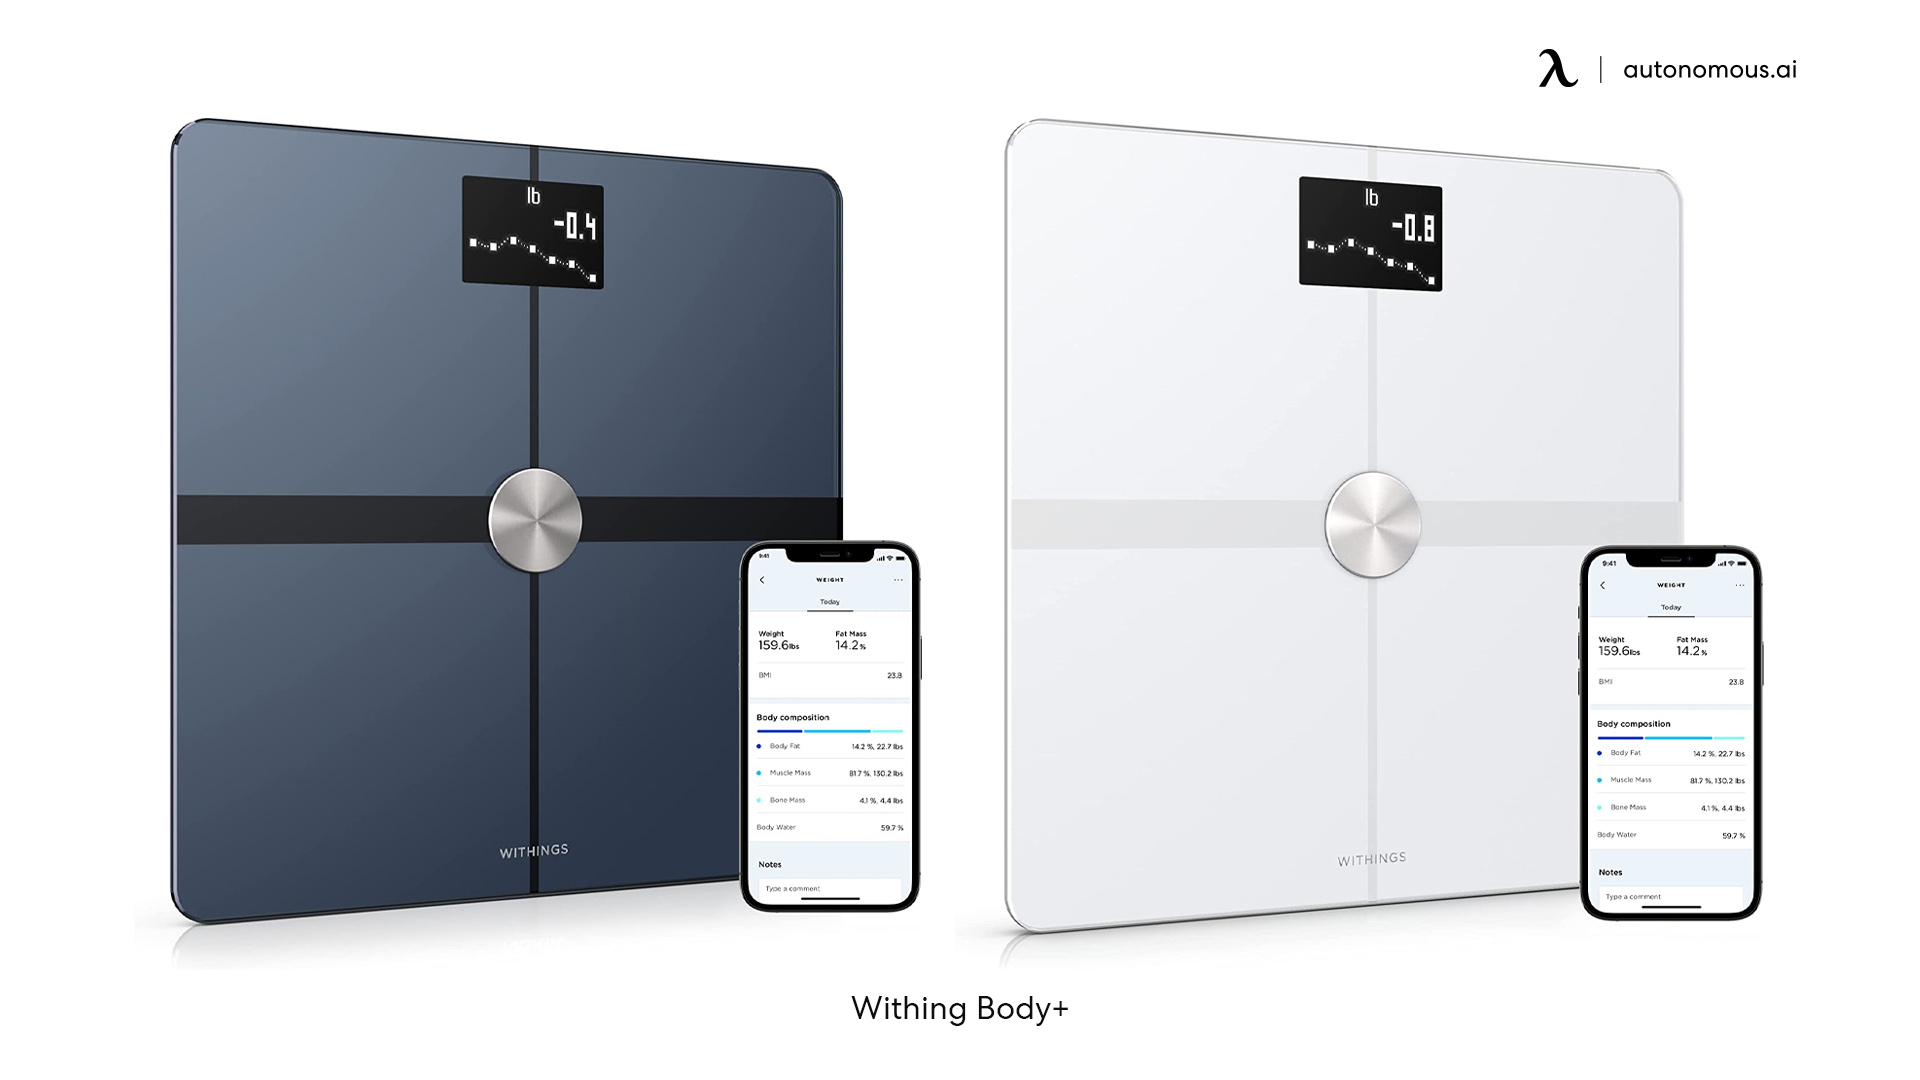 Withing Body+ smart scale